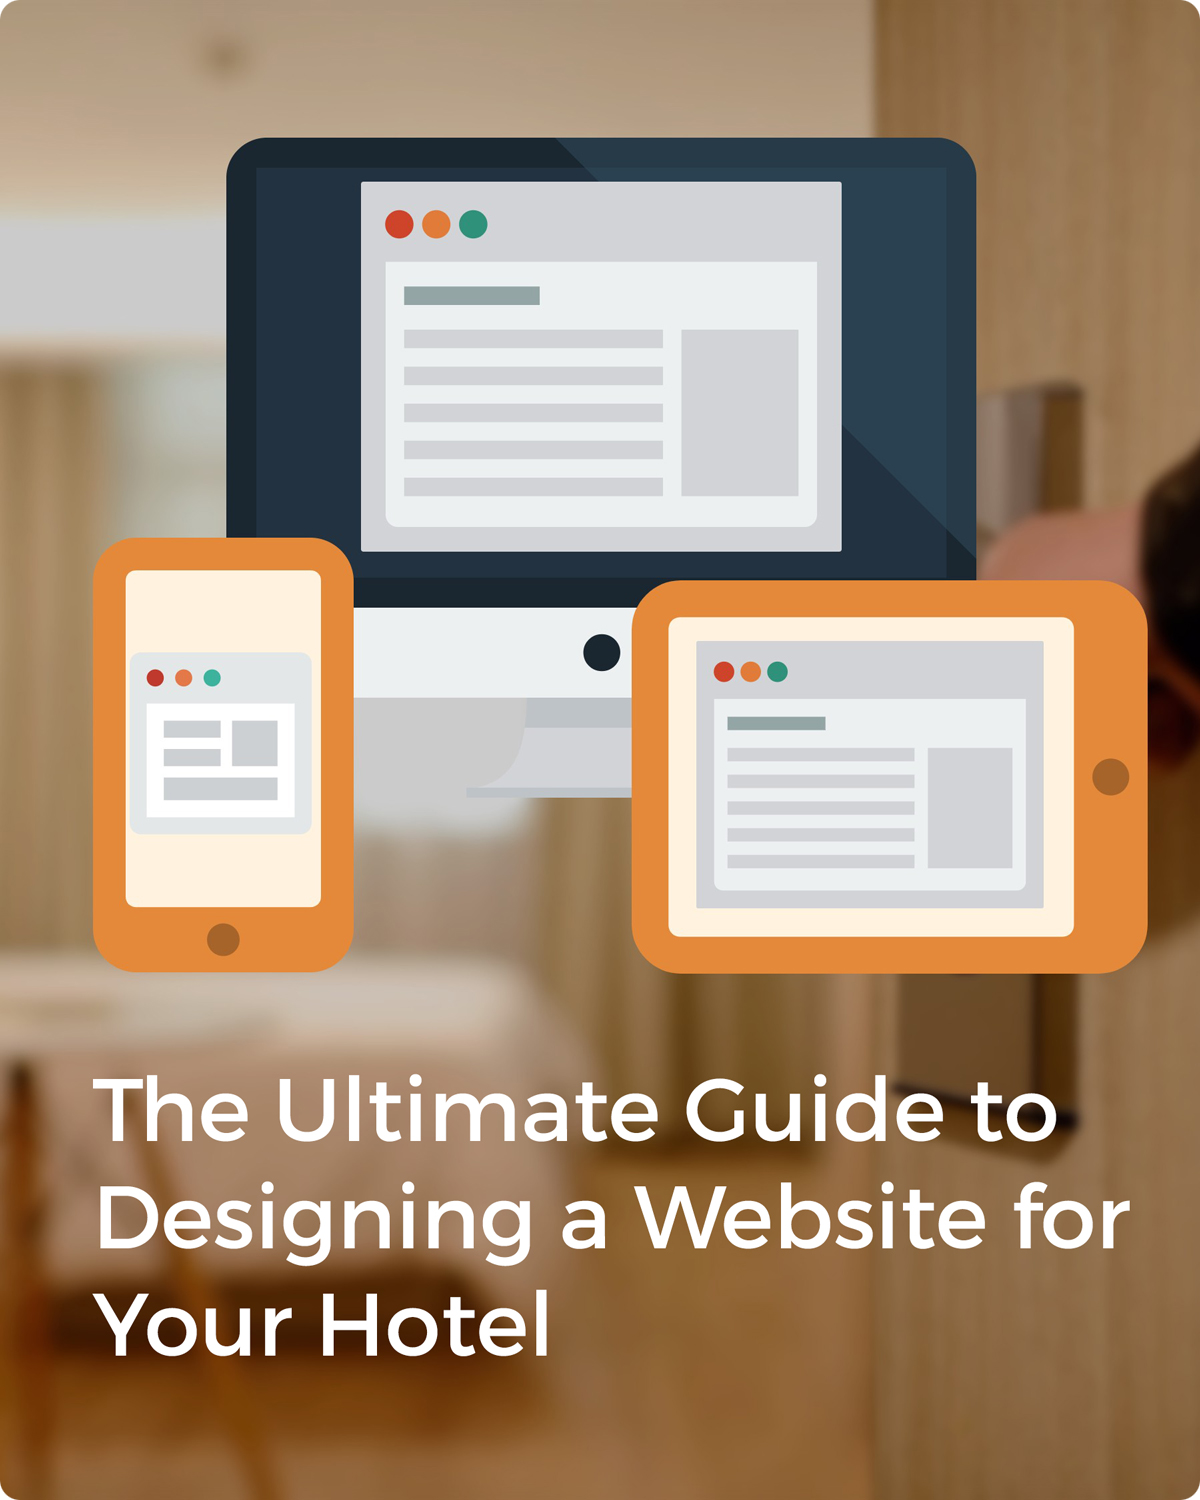 The Ultimate Guide to Designing a Website for Your Hotel